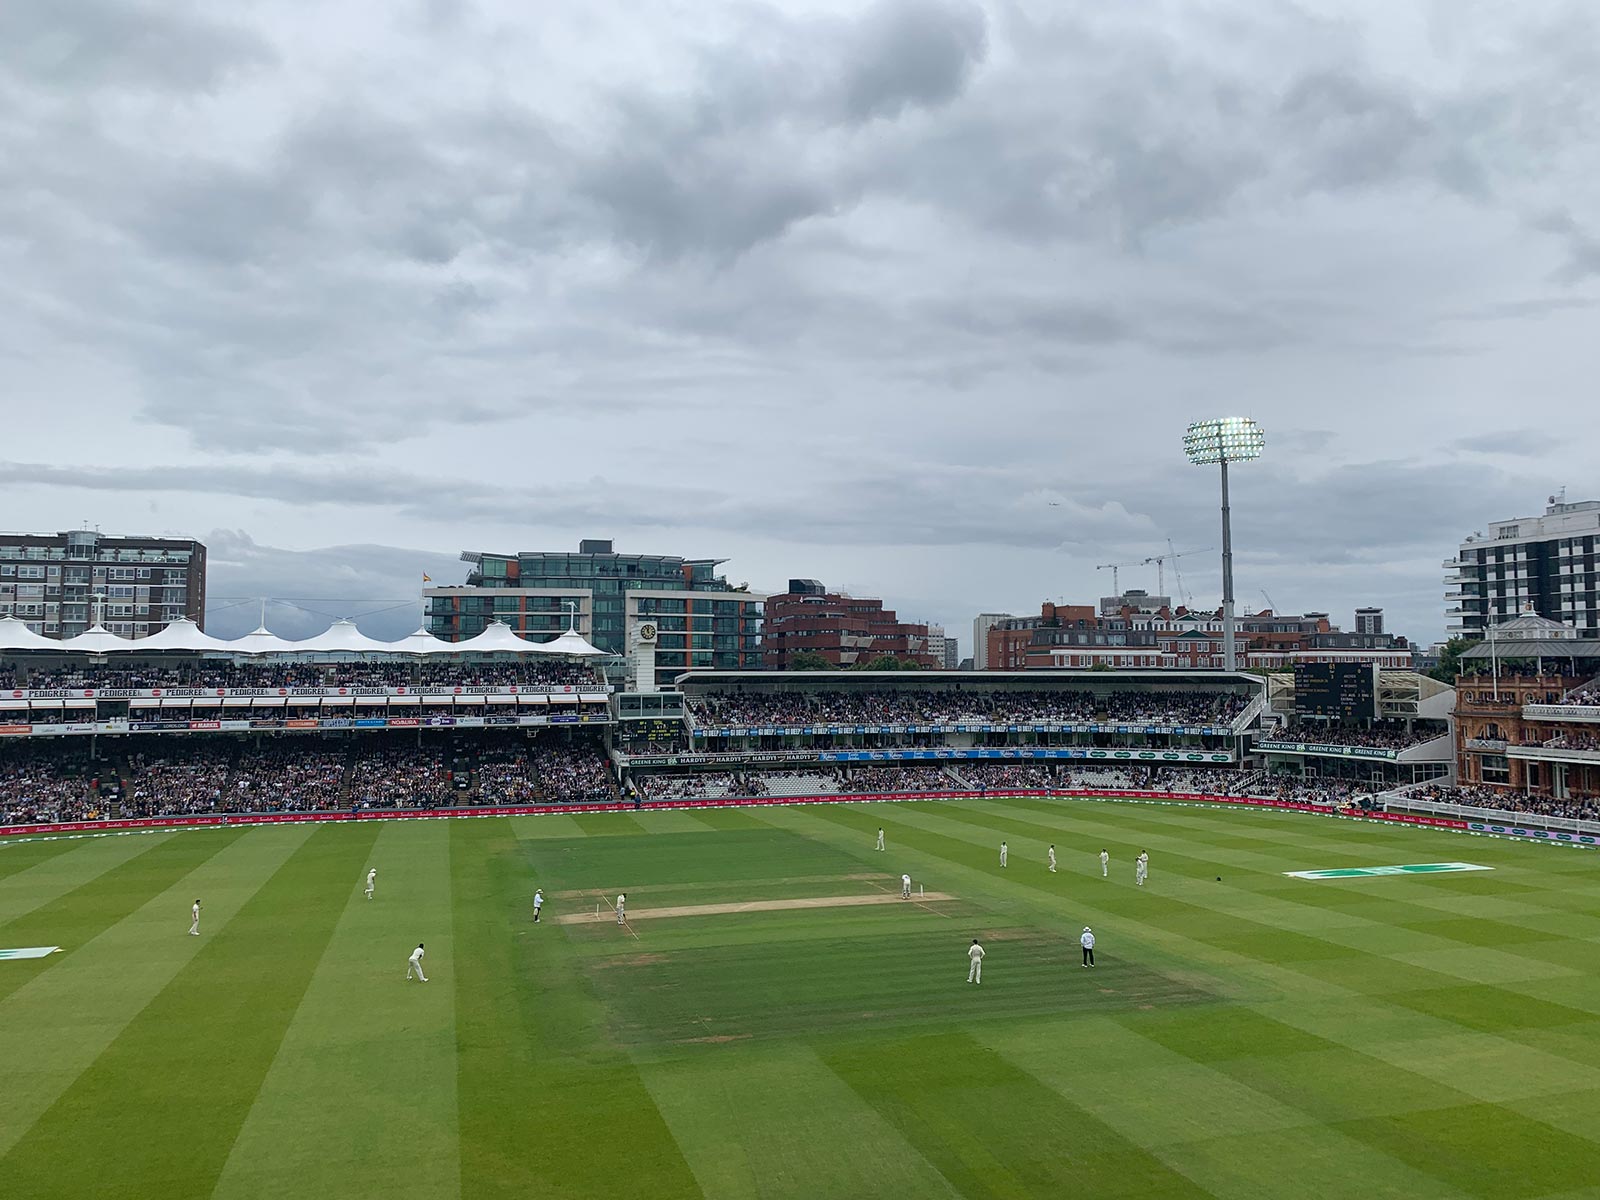 Old Trafford Cricket Ground in Trafford, England. The ashes, 2019